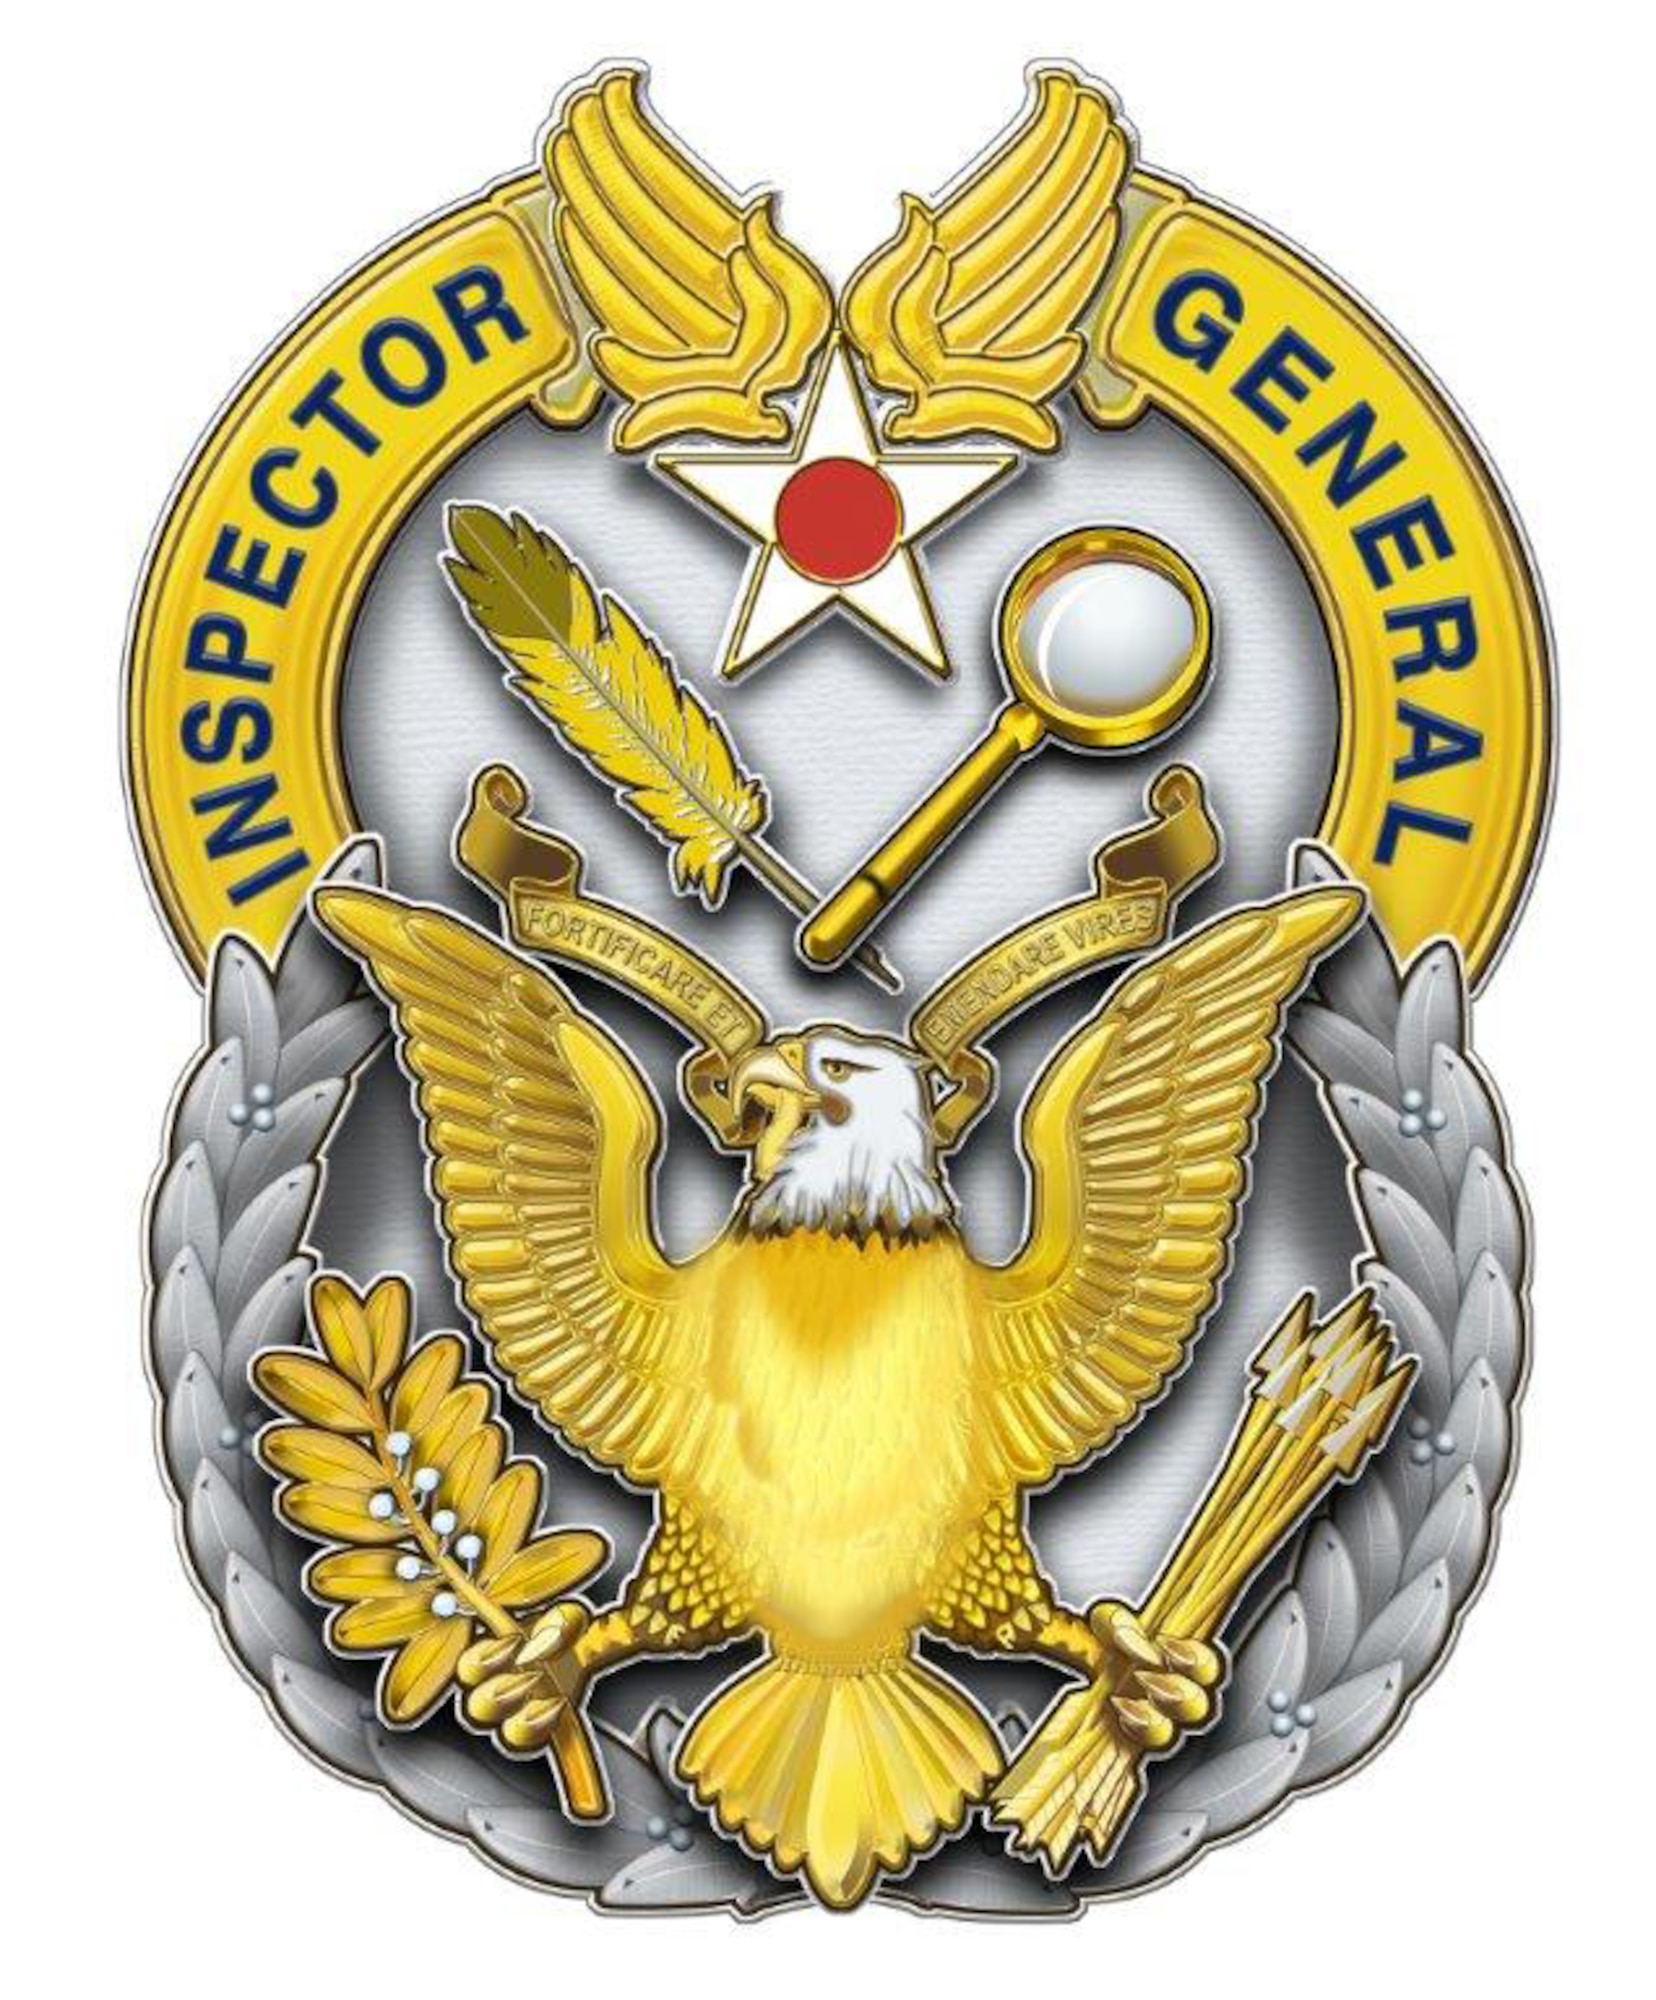 The Air Force Inspector General badge. (Courtesy graphic)